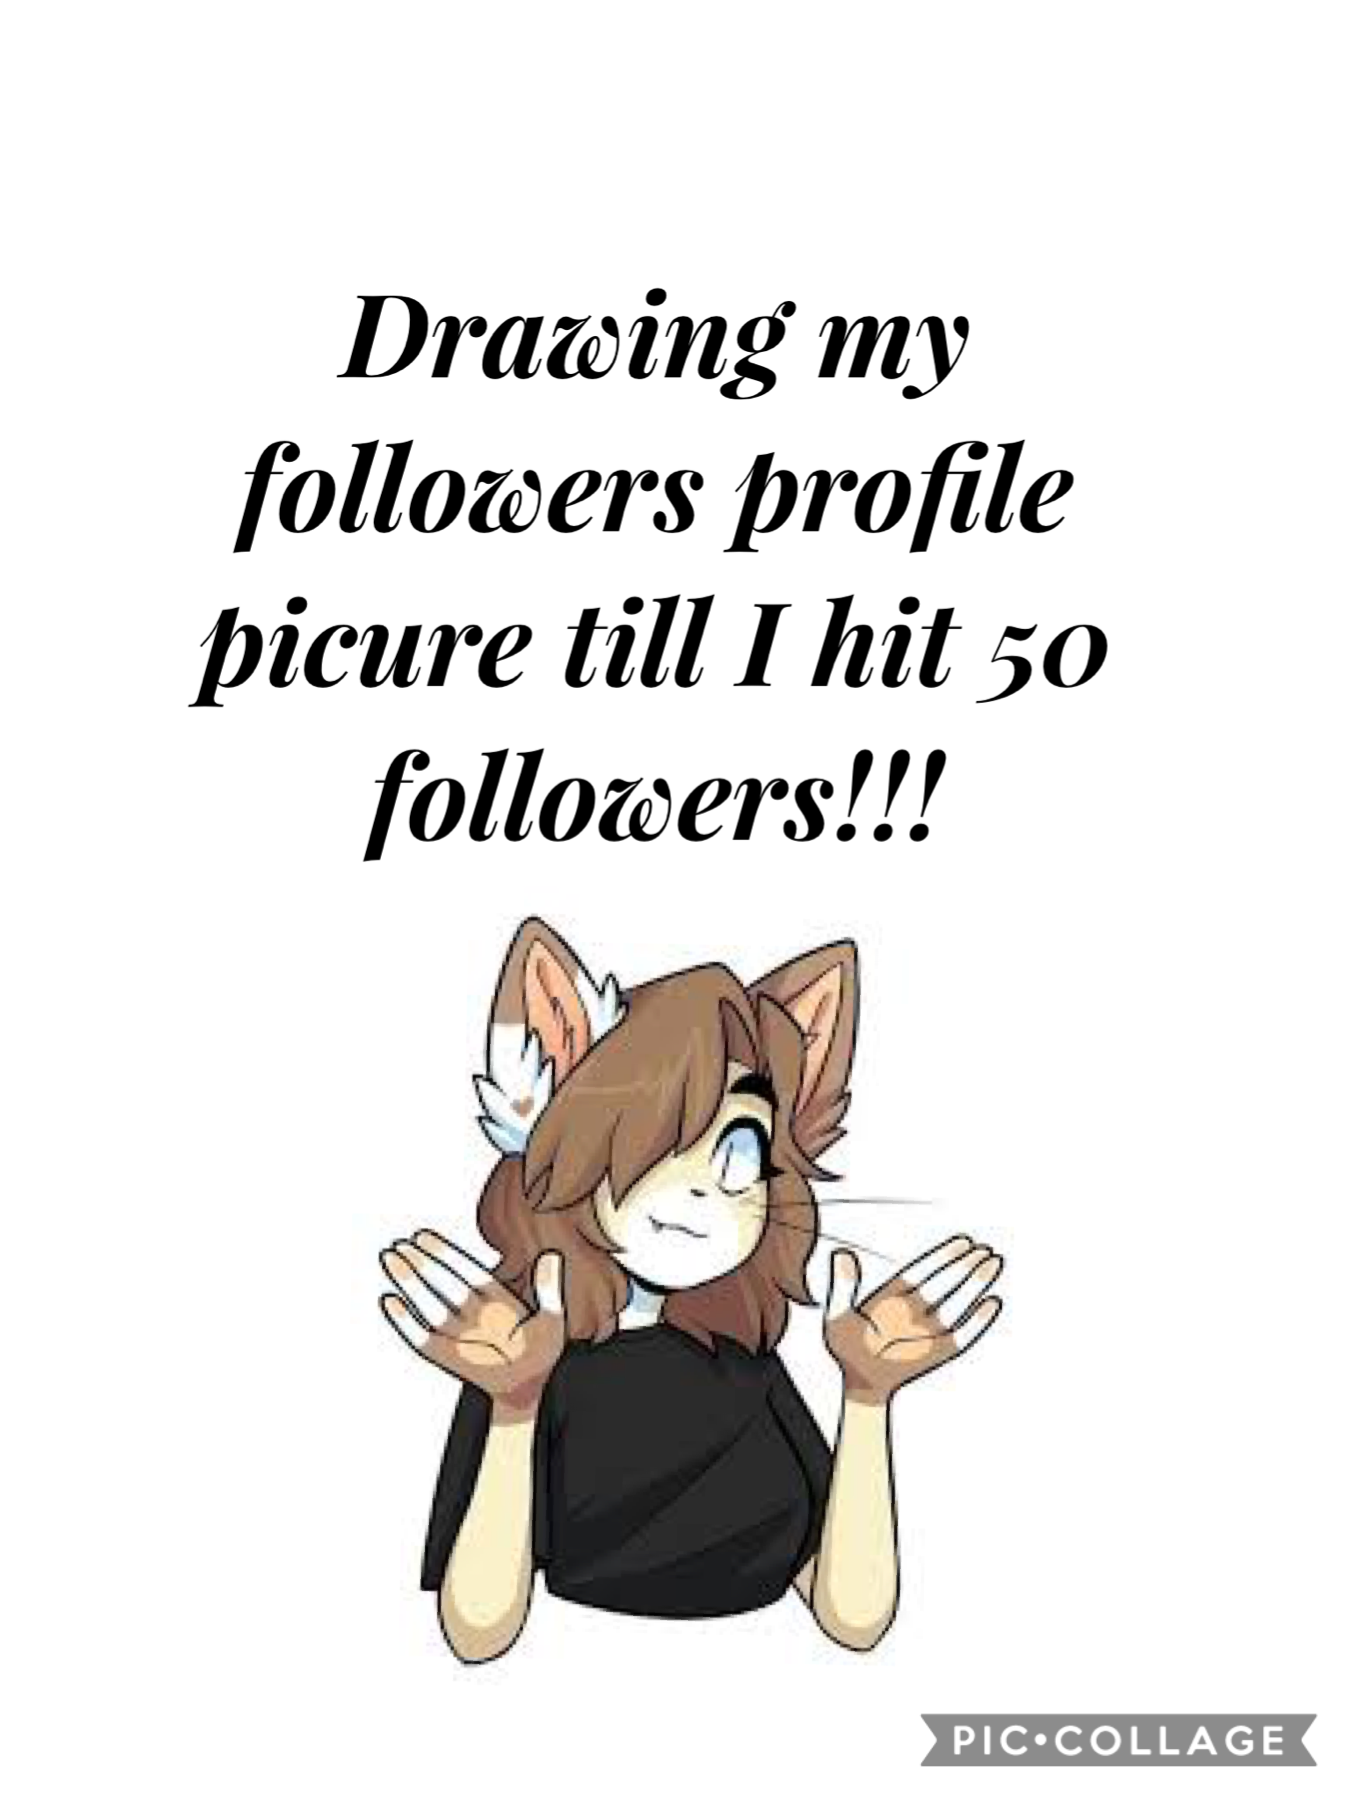 TADA NEW THING ALSO ASK MY OCS QUESTIONS! go through my colloges to find the q and a if u want to ask my ocs questions!